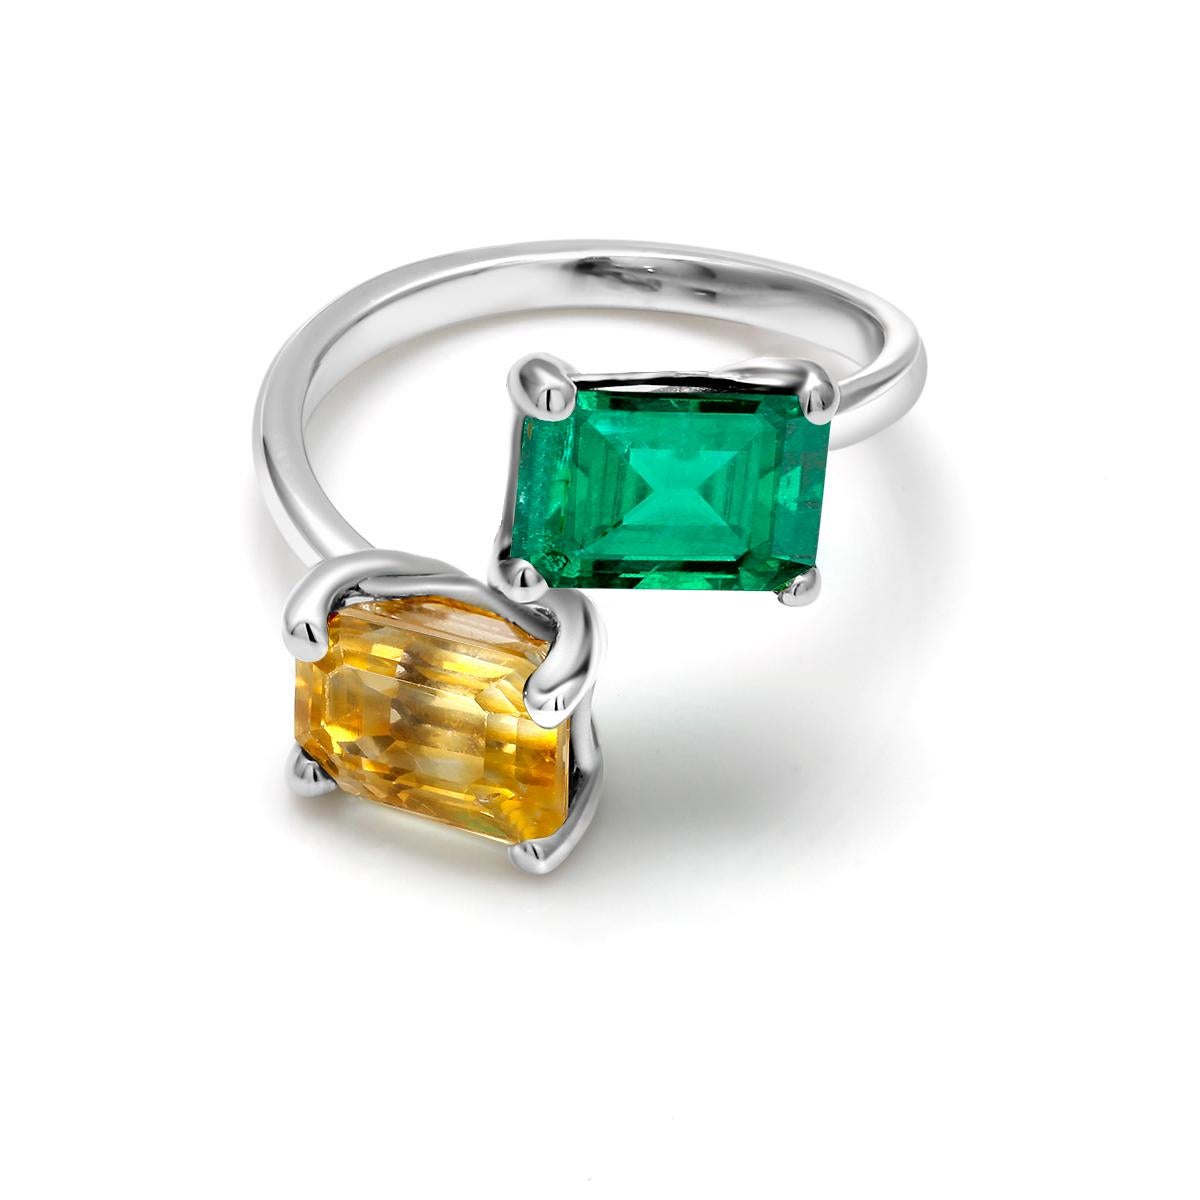 18 karat two tone white and yellow Open shank cocktail ring
Emerald cut emerald weighing 1.25 carat  
Emerald cut yellow sapphire weighing 2.86 carat                                                                    
Ring size 6.5 In Stock
Ring can